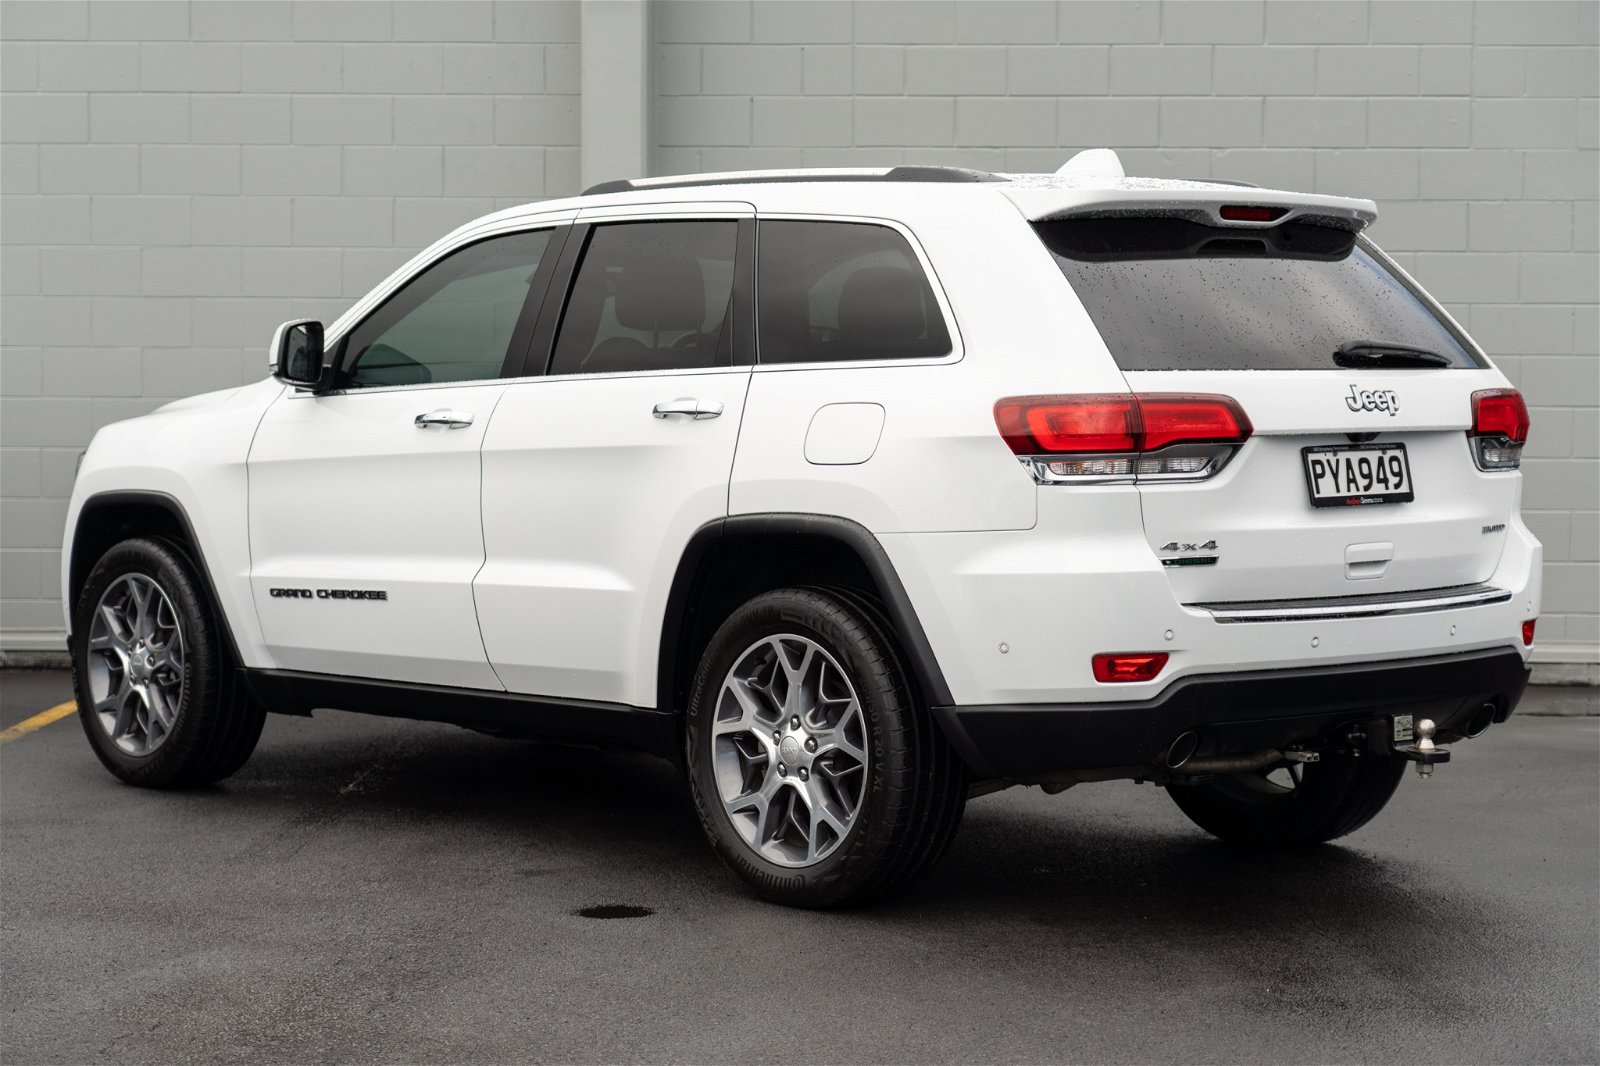 2020 Jeep Grand Cherokee Limited 3.0D 4WD 8A 5Dr Wagon